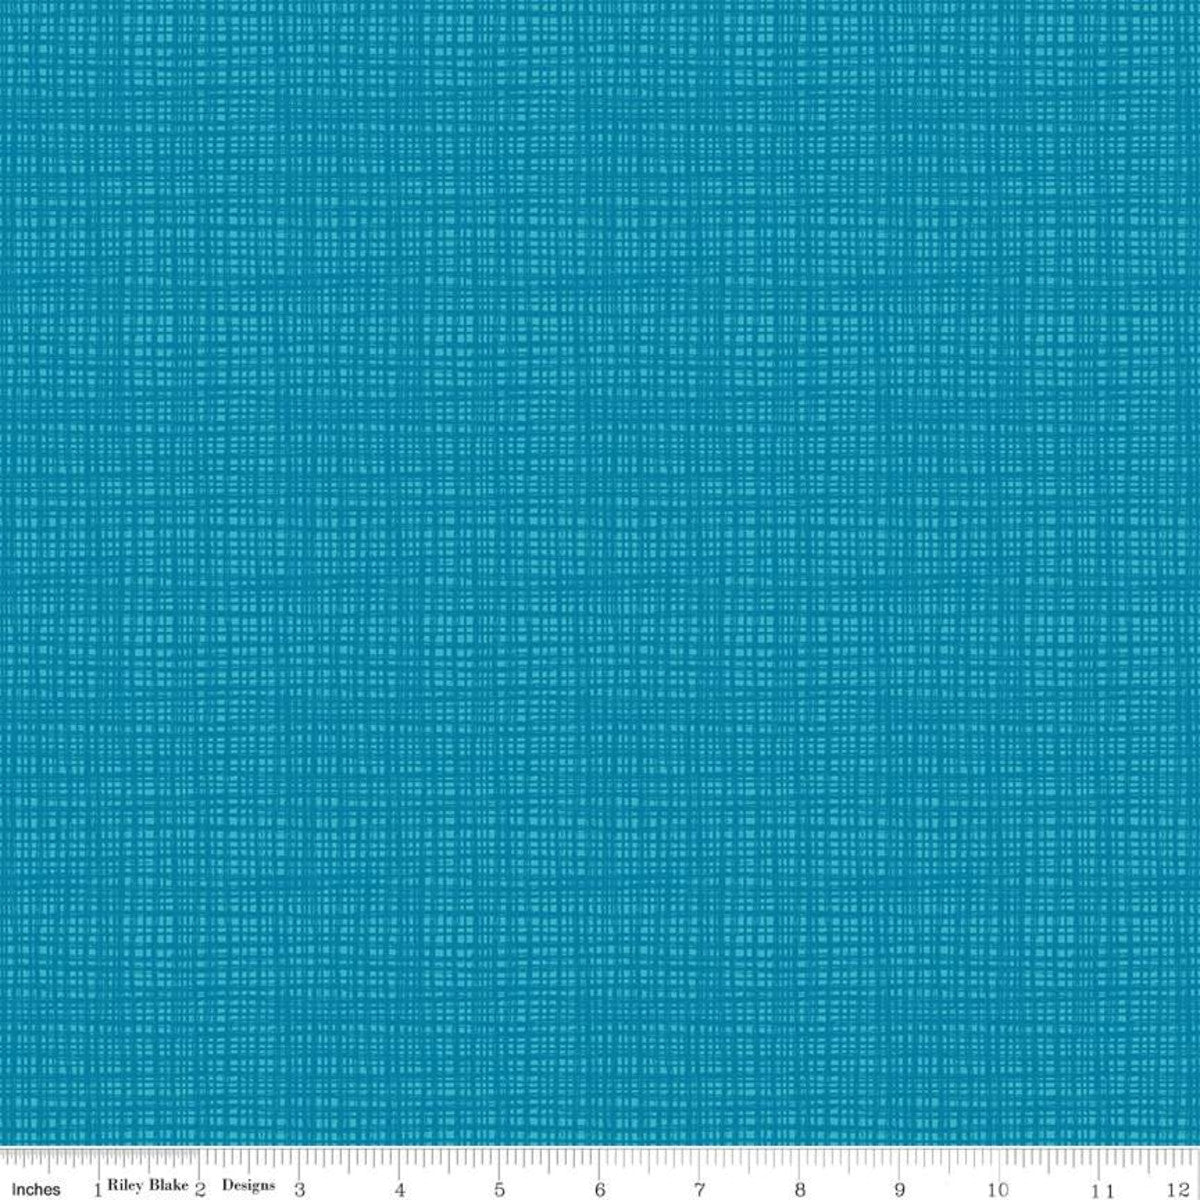 Quilting, Riley Blake, Sewing Texture Fabric, Texture Fabric, Quilting Fabric, Quilting cotton, Texture from Riley Blake, 100% Cotton, Sewing, Embroidery, Quilt Shop Fabric, Caribbean